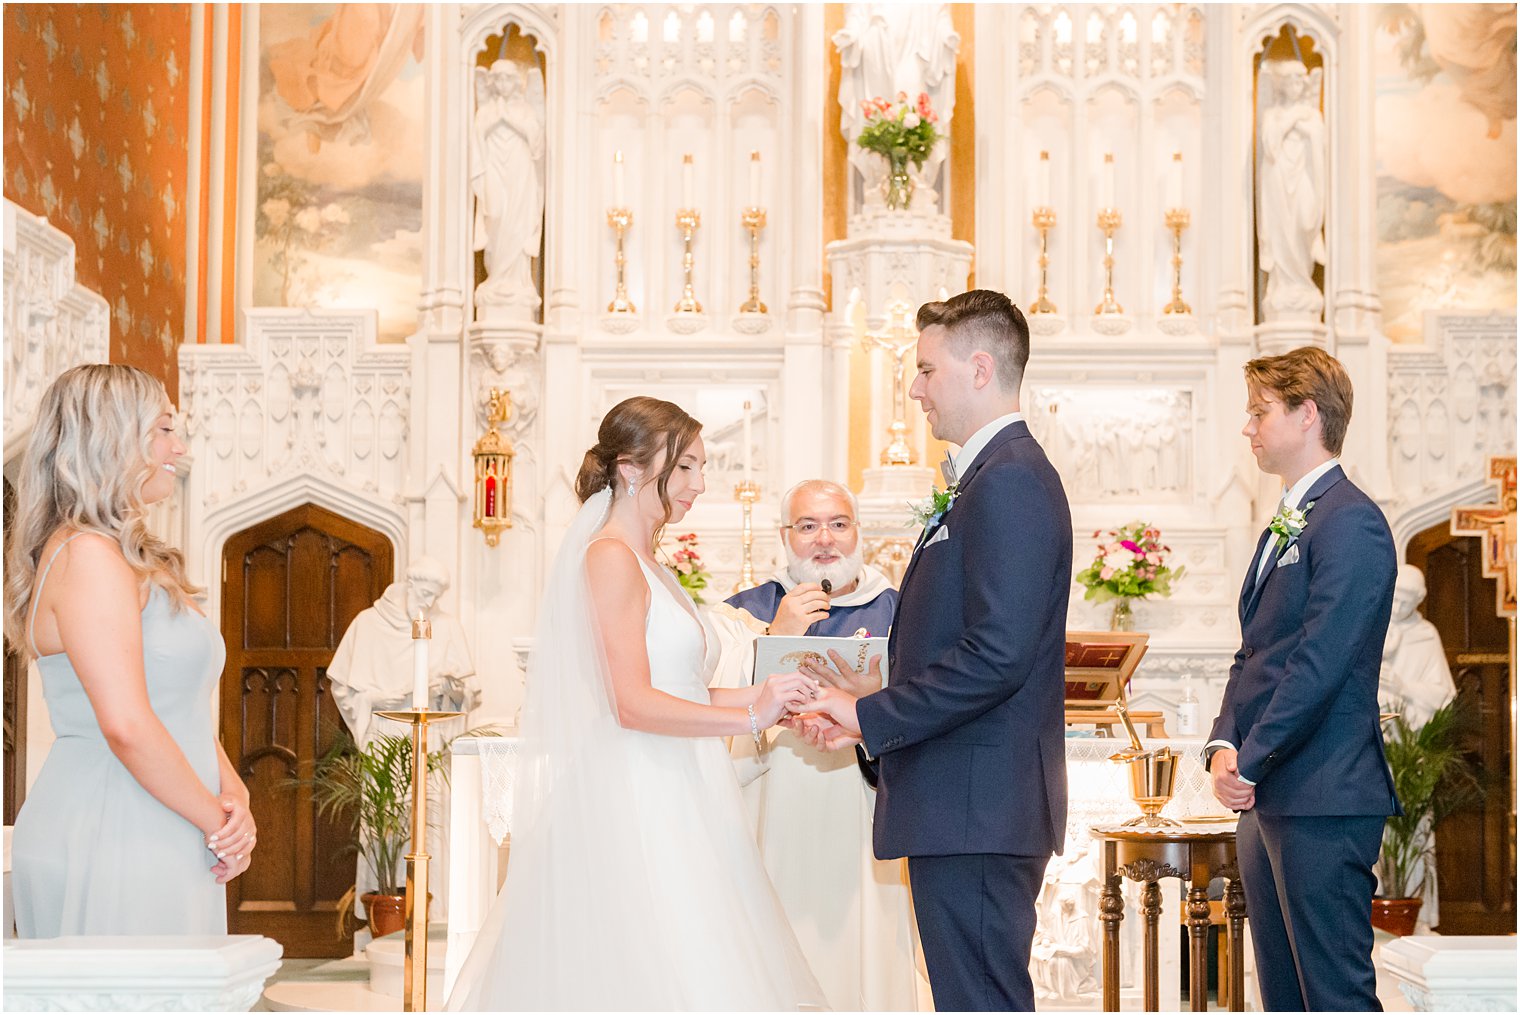 traditional church wedding ceremony at St. Peter's Church